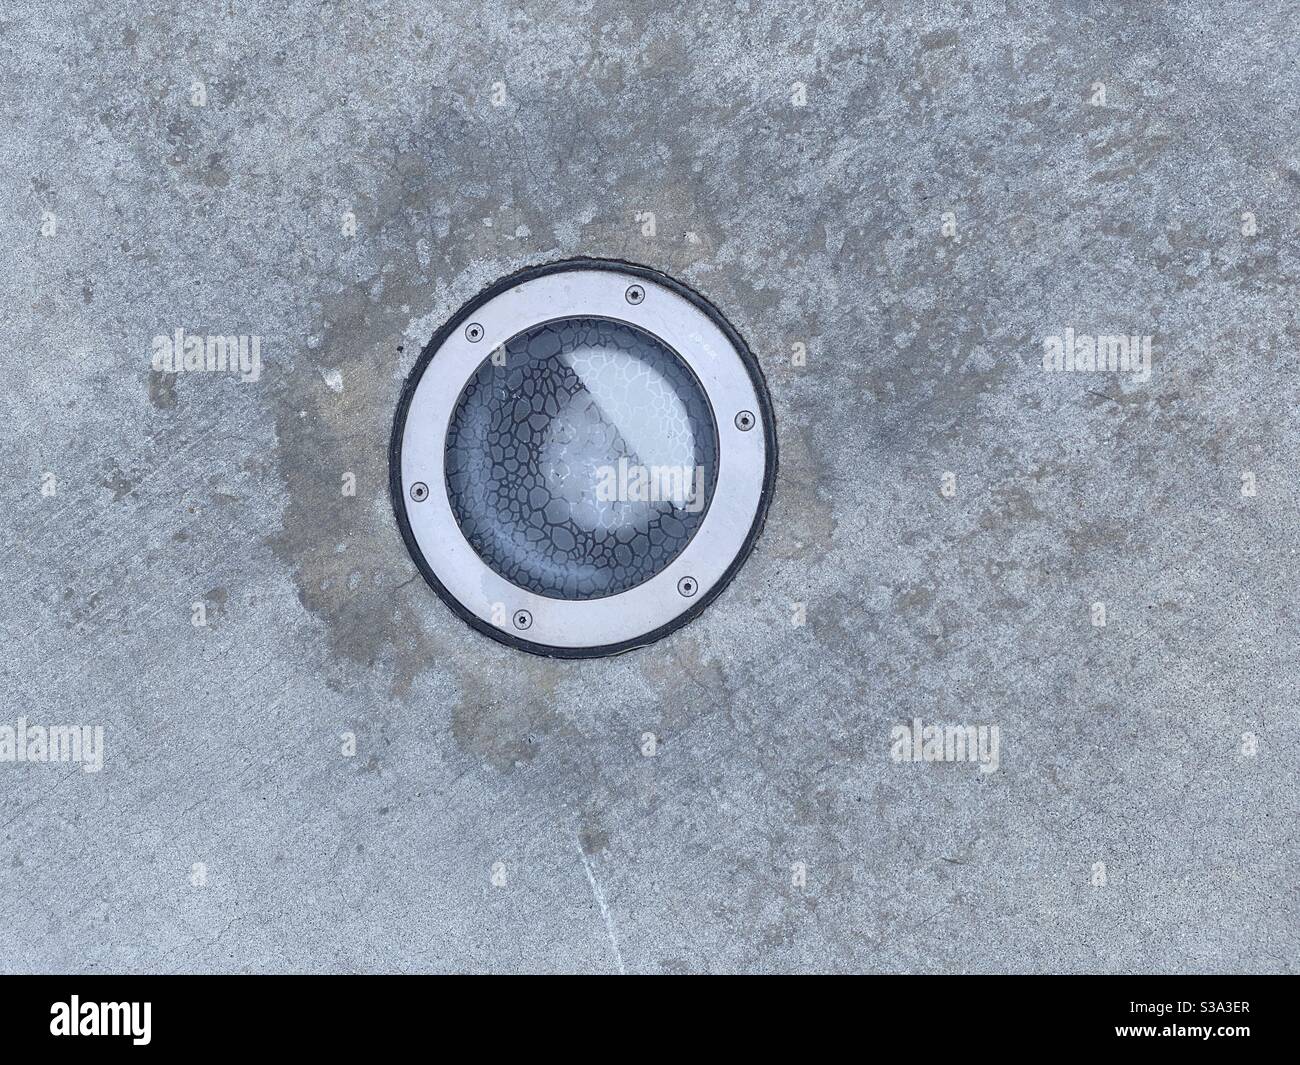 Detail of light with textured glass cover, embedded in concrete sidewalk, creating abstract background texture Stock Photo